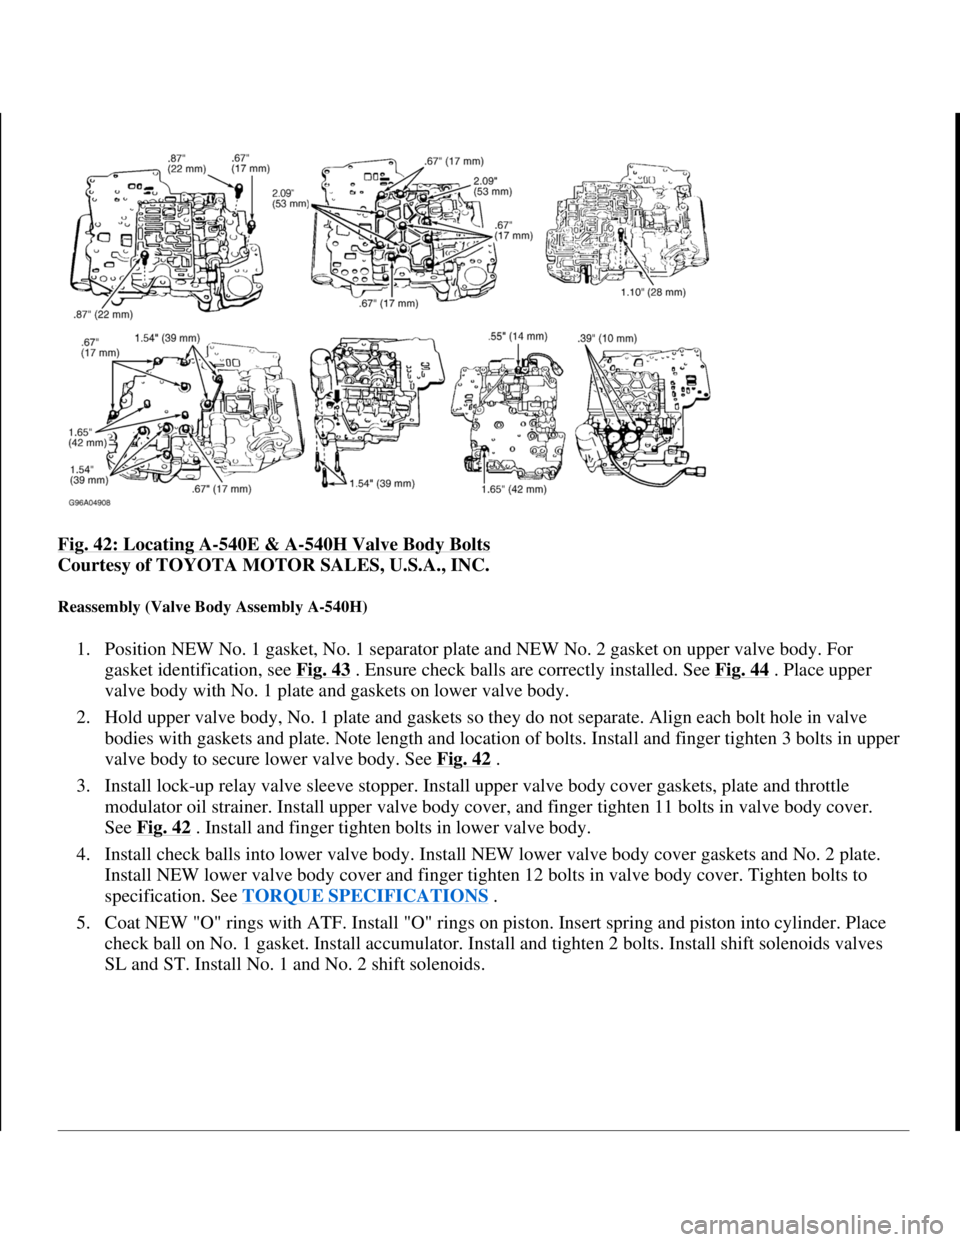 TOYOTA RAV4 1996  Service Repair Manual Fig. 42: Locating A-540E & A-540H Valve Body Bolts 
Courtesy of TOYOTA MOTOR SALES, U.S.A., INC. 
Reassembly (Valve Body Assembly A-540H) 
1. Position NEW No. 1 gasket, No. 1 separator plate and NEW N